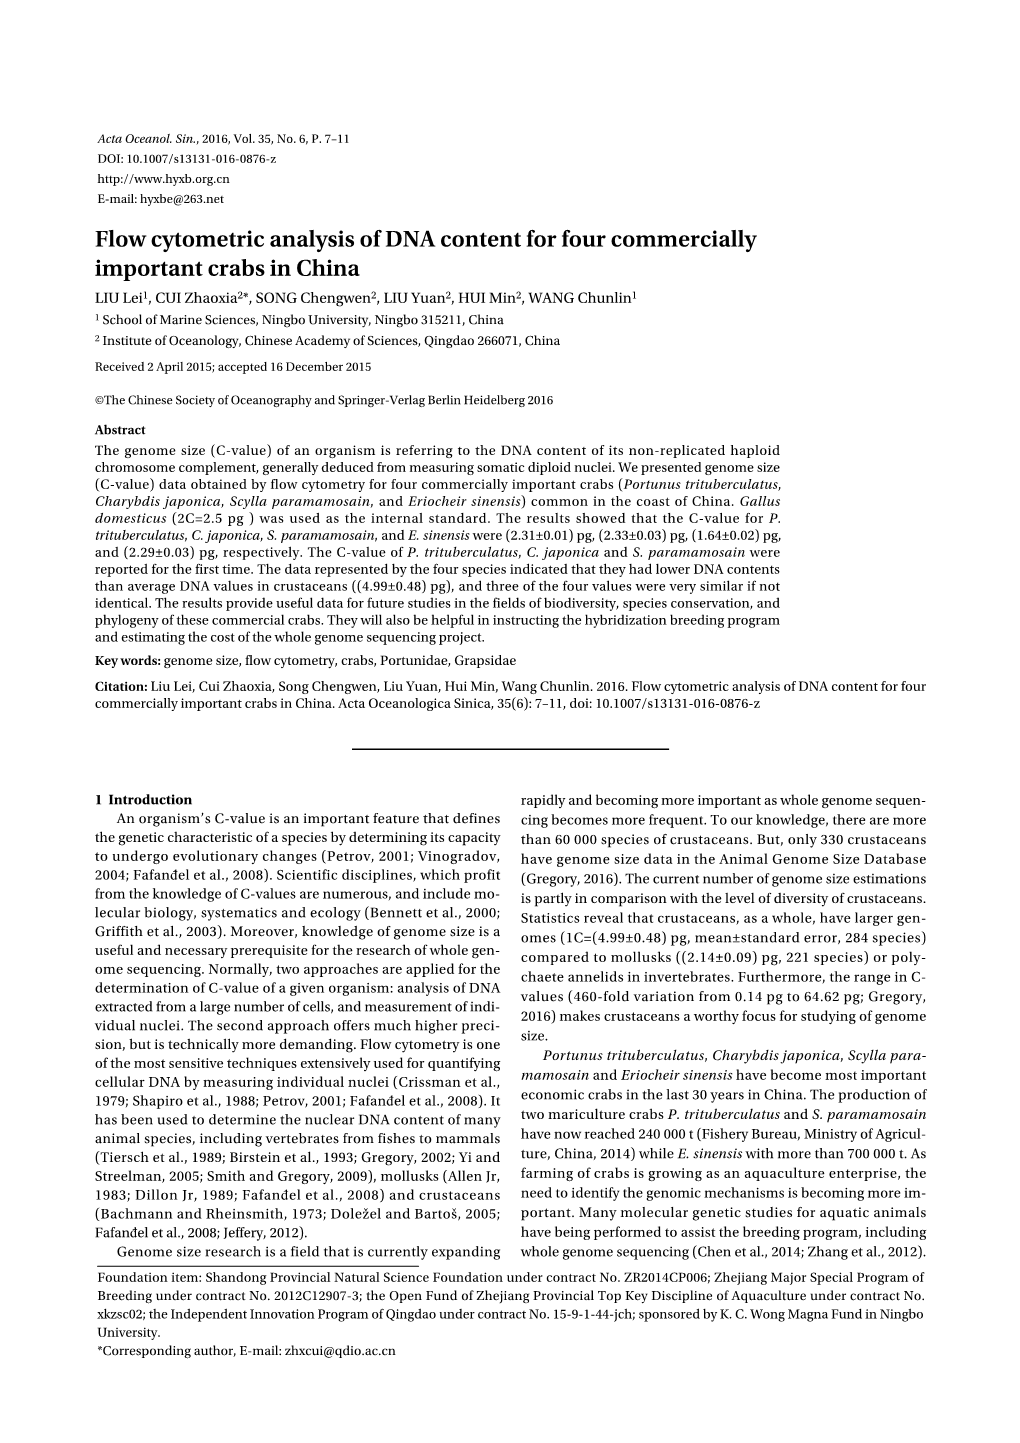 Flow Cytometric Analysis of DNA Content for Four Commercially